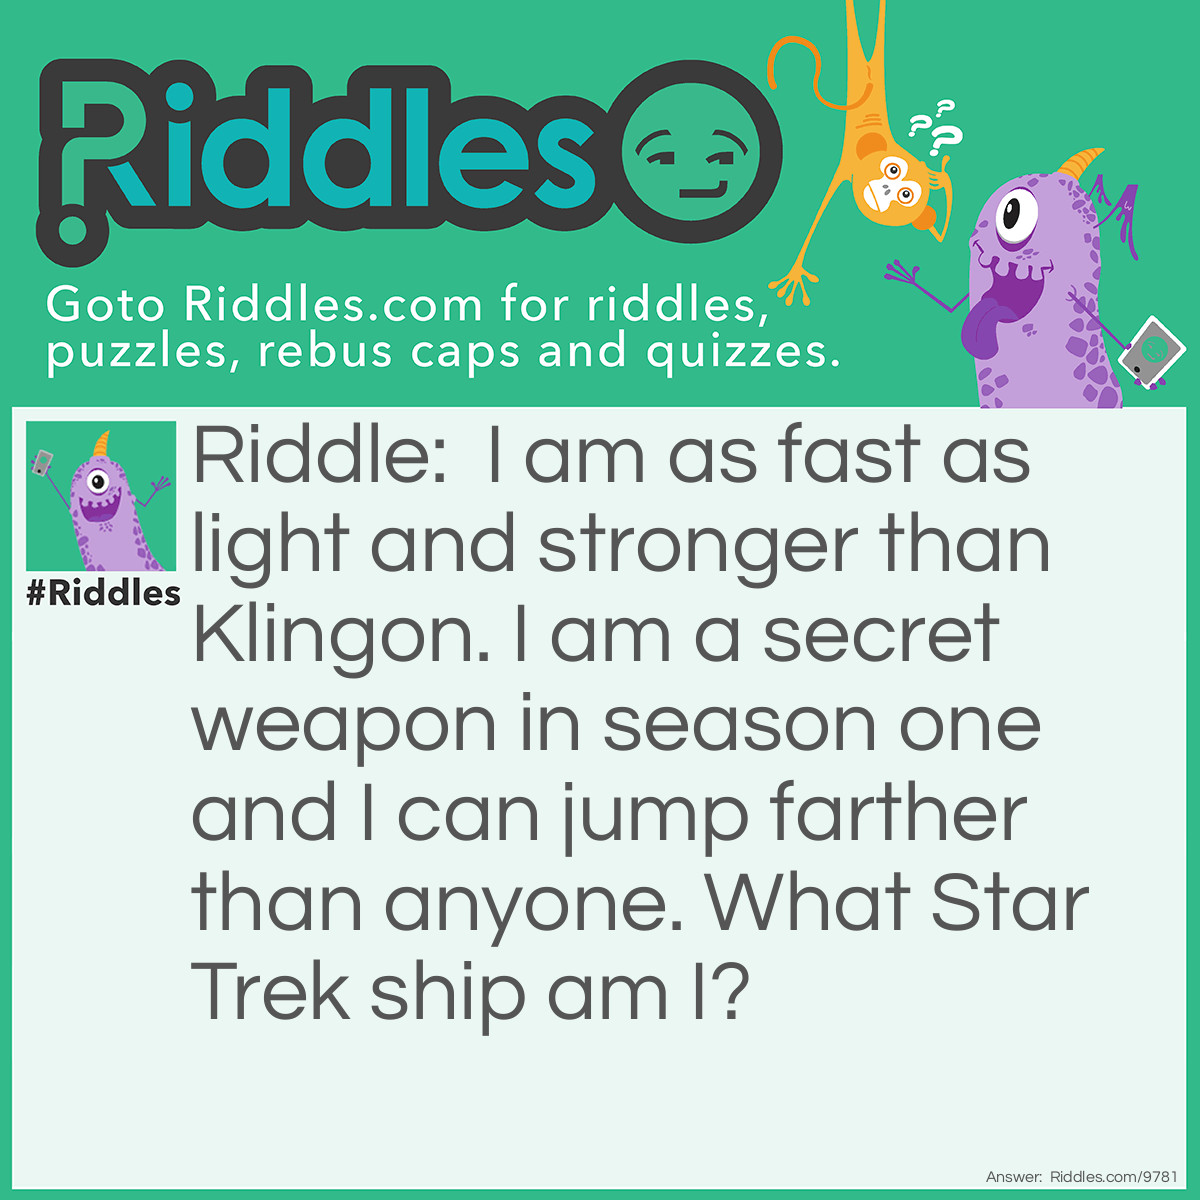 Riddle: I am as fast as light and stronger than Klingon. I am a secret weapon in season one and I can jump farther than anyone. What Star Trek ship am I? Answer: Discovery.